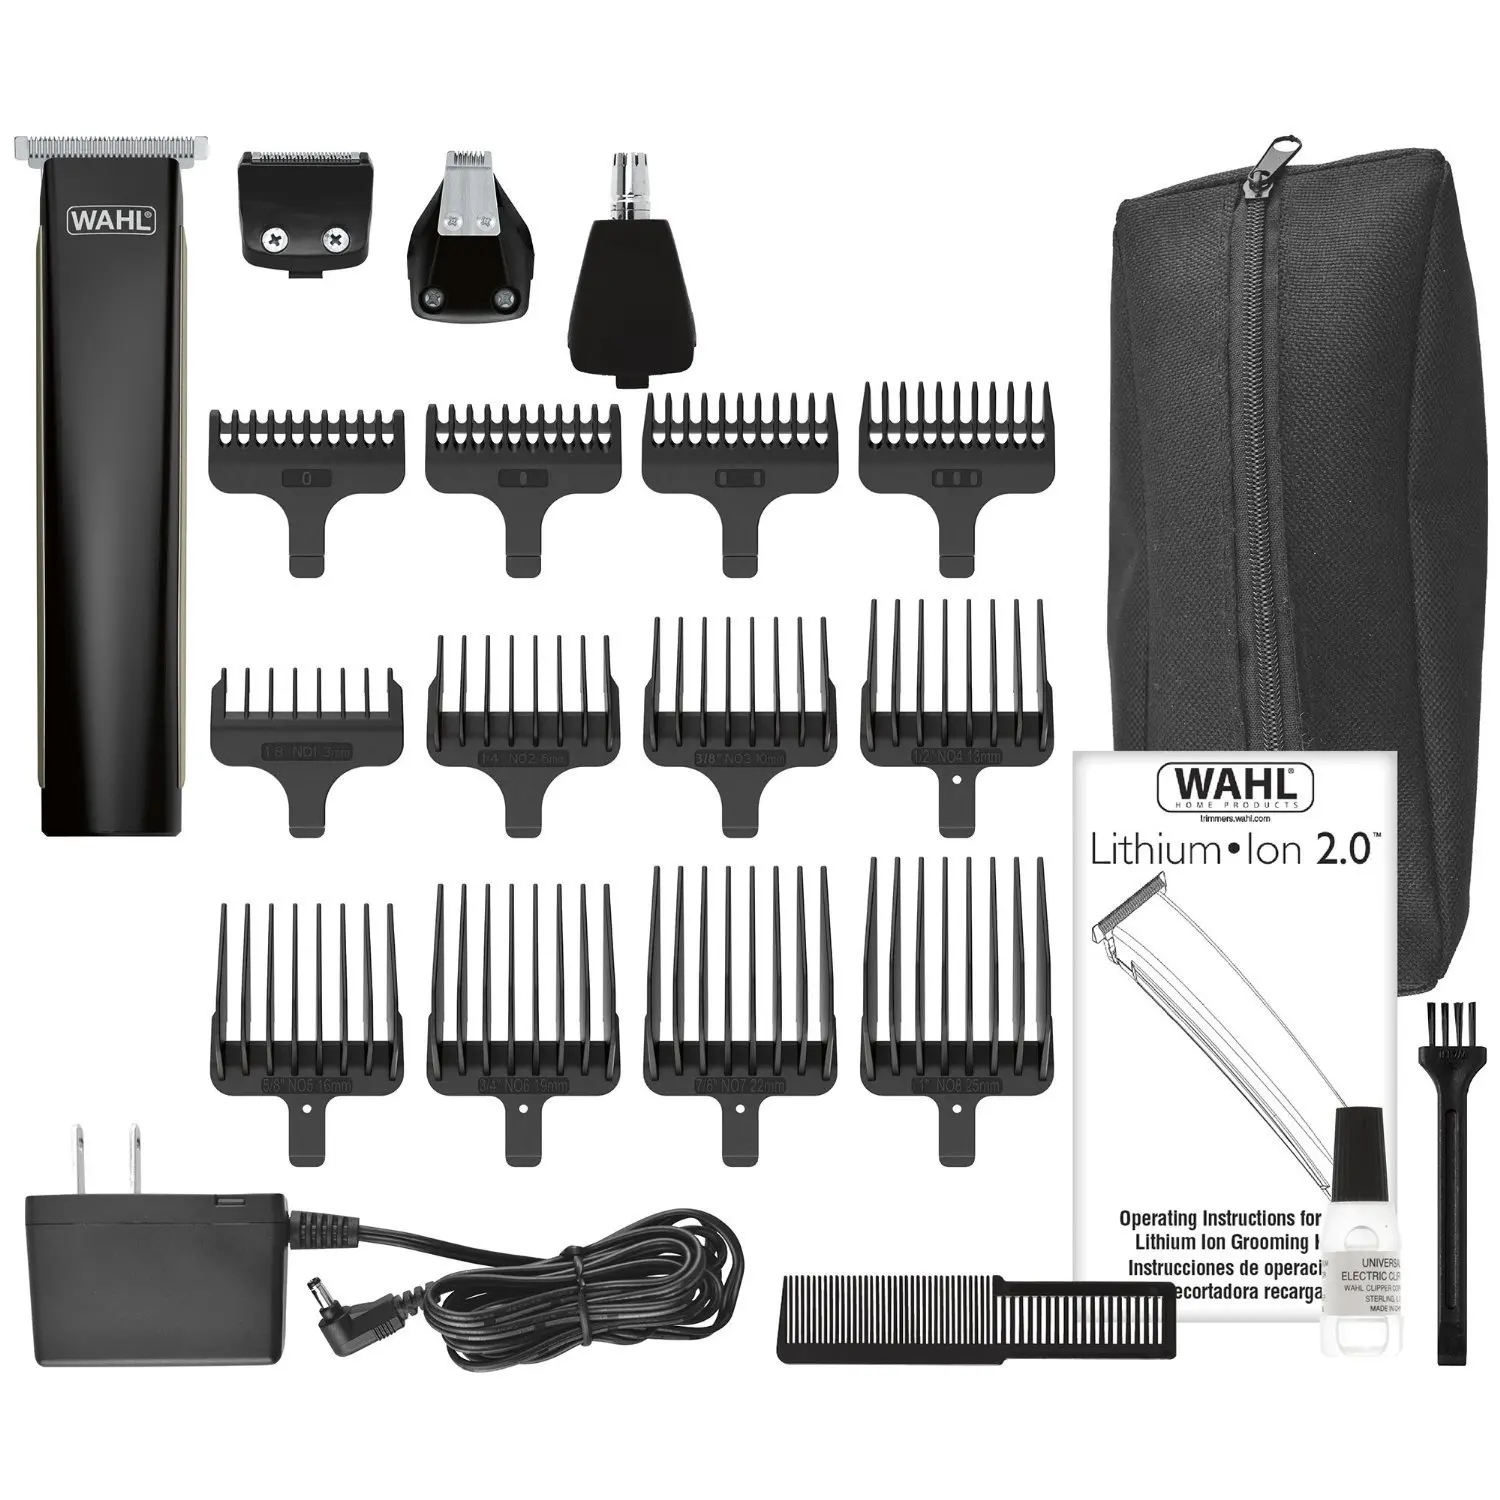 wahl trimmer cordless